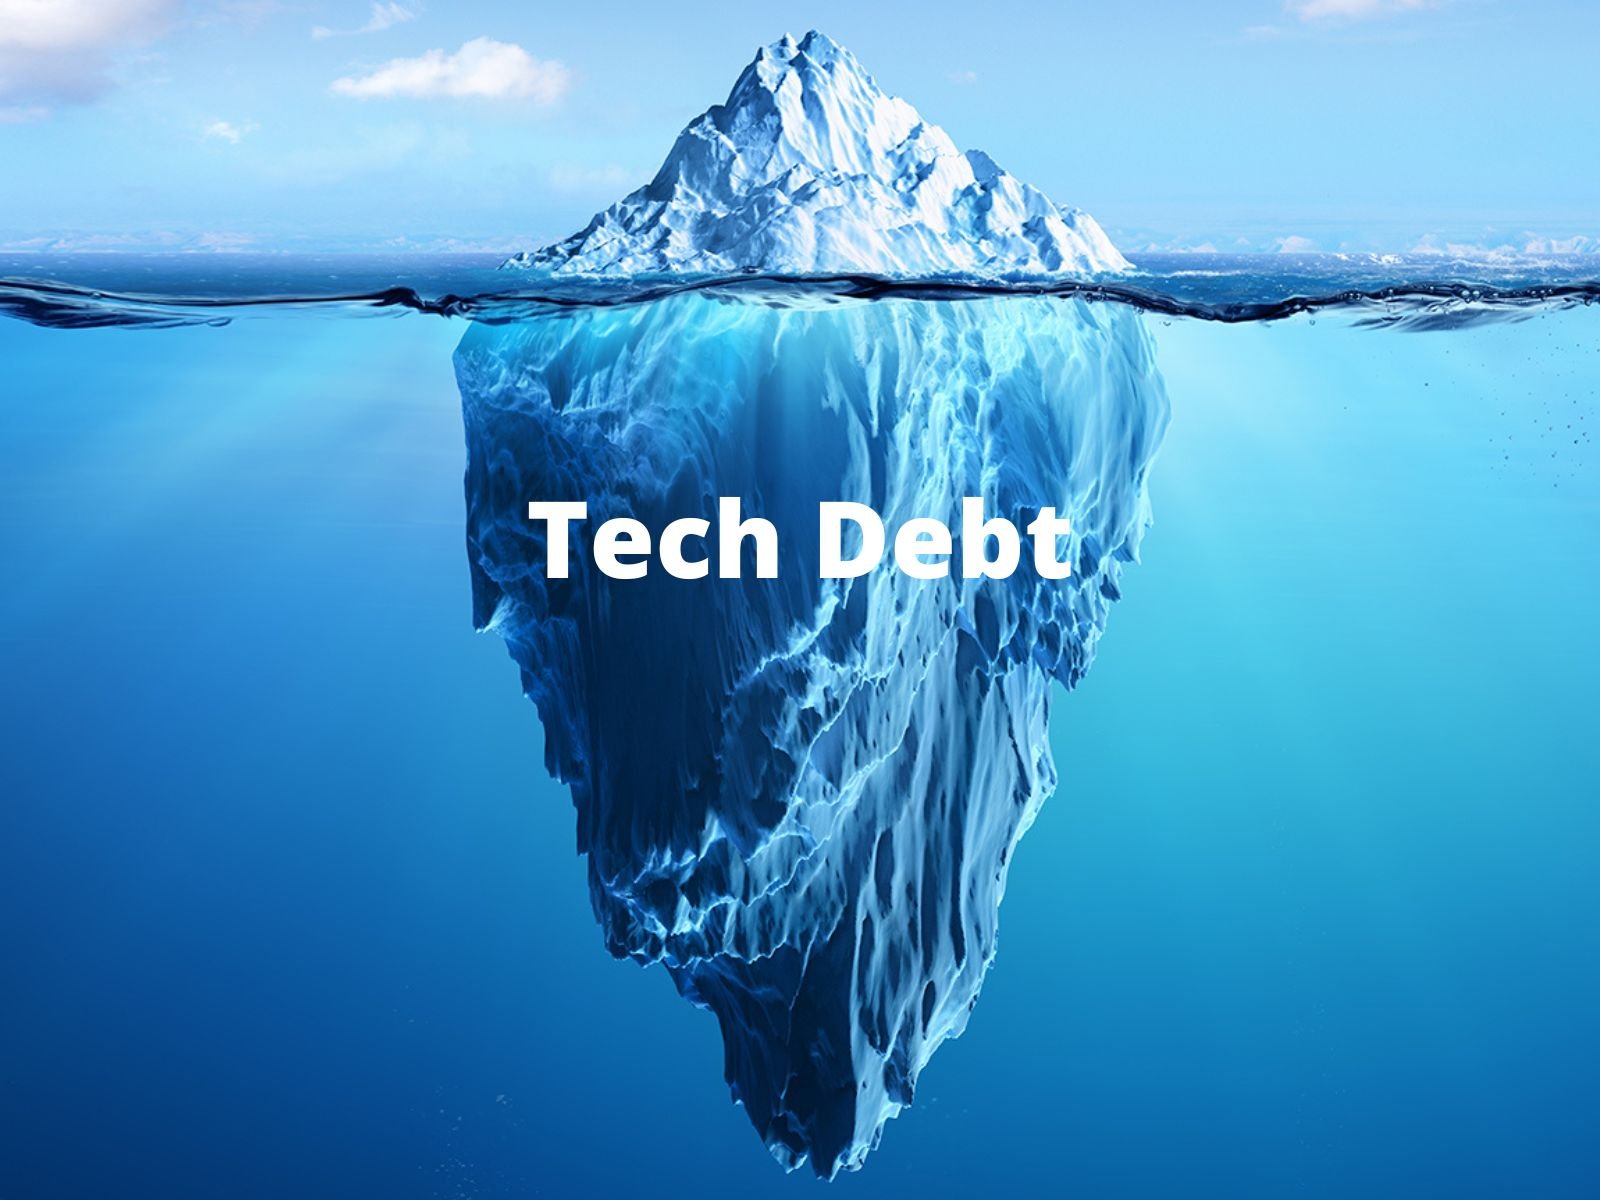 What is Tech Debt and Why Should I Care